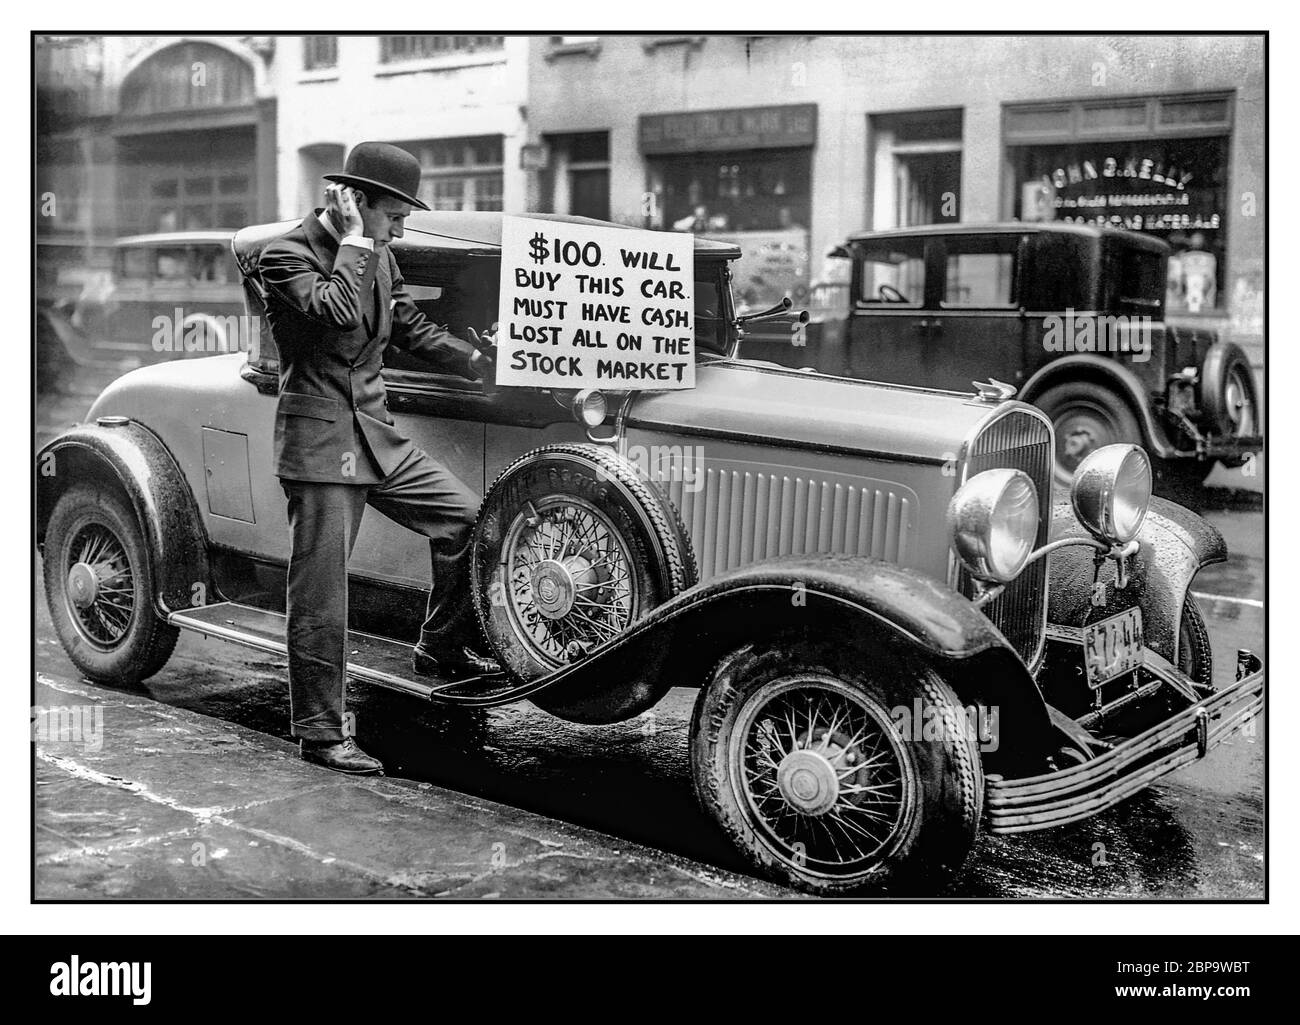 1900’s WALL STREET CRASH VINTAGE CAR SALE The Wall Street financial crash of 1929 Archive New York Wall Street USA with this city businessman speculator trying to sell his car for $100 cash having lost all on the stock market Stock Photo